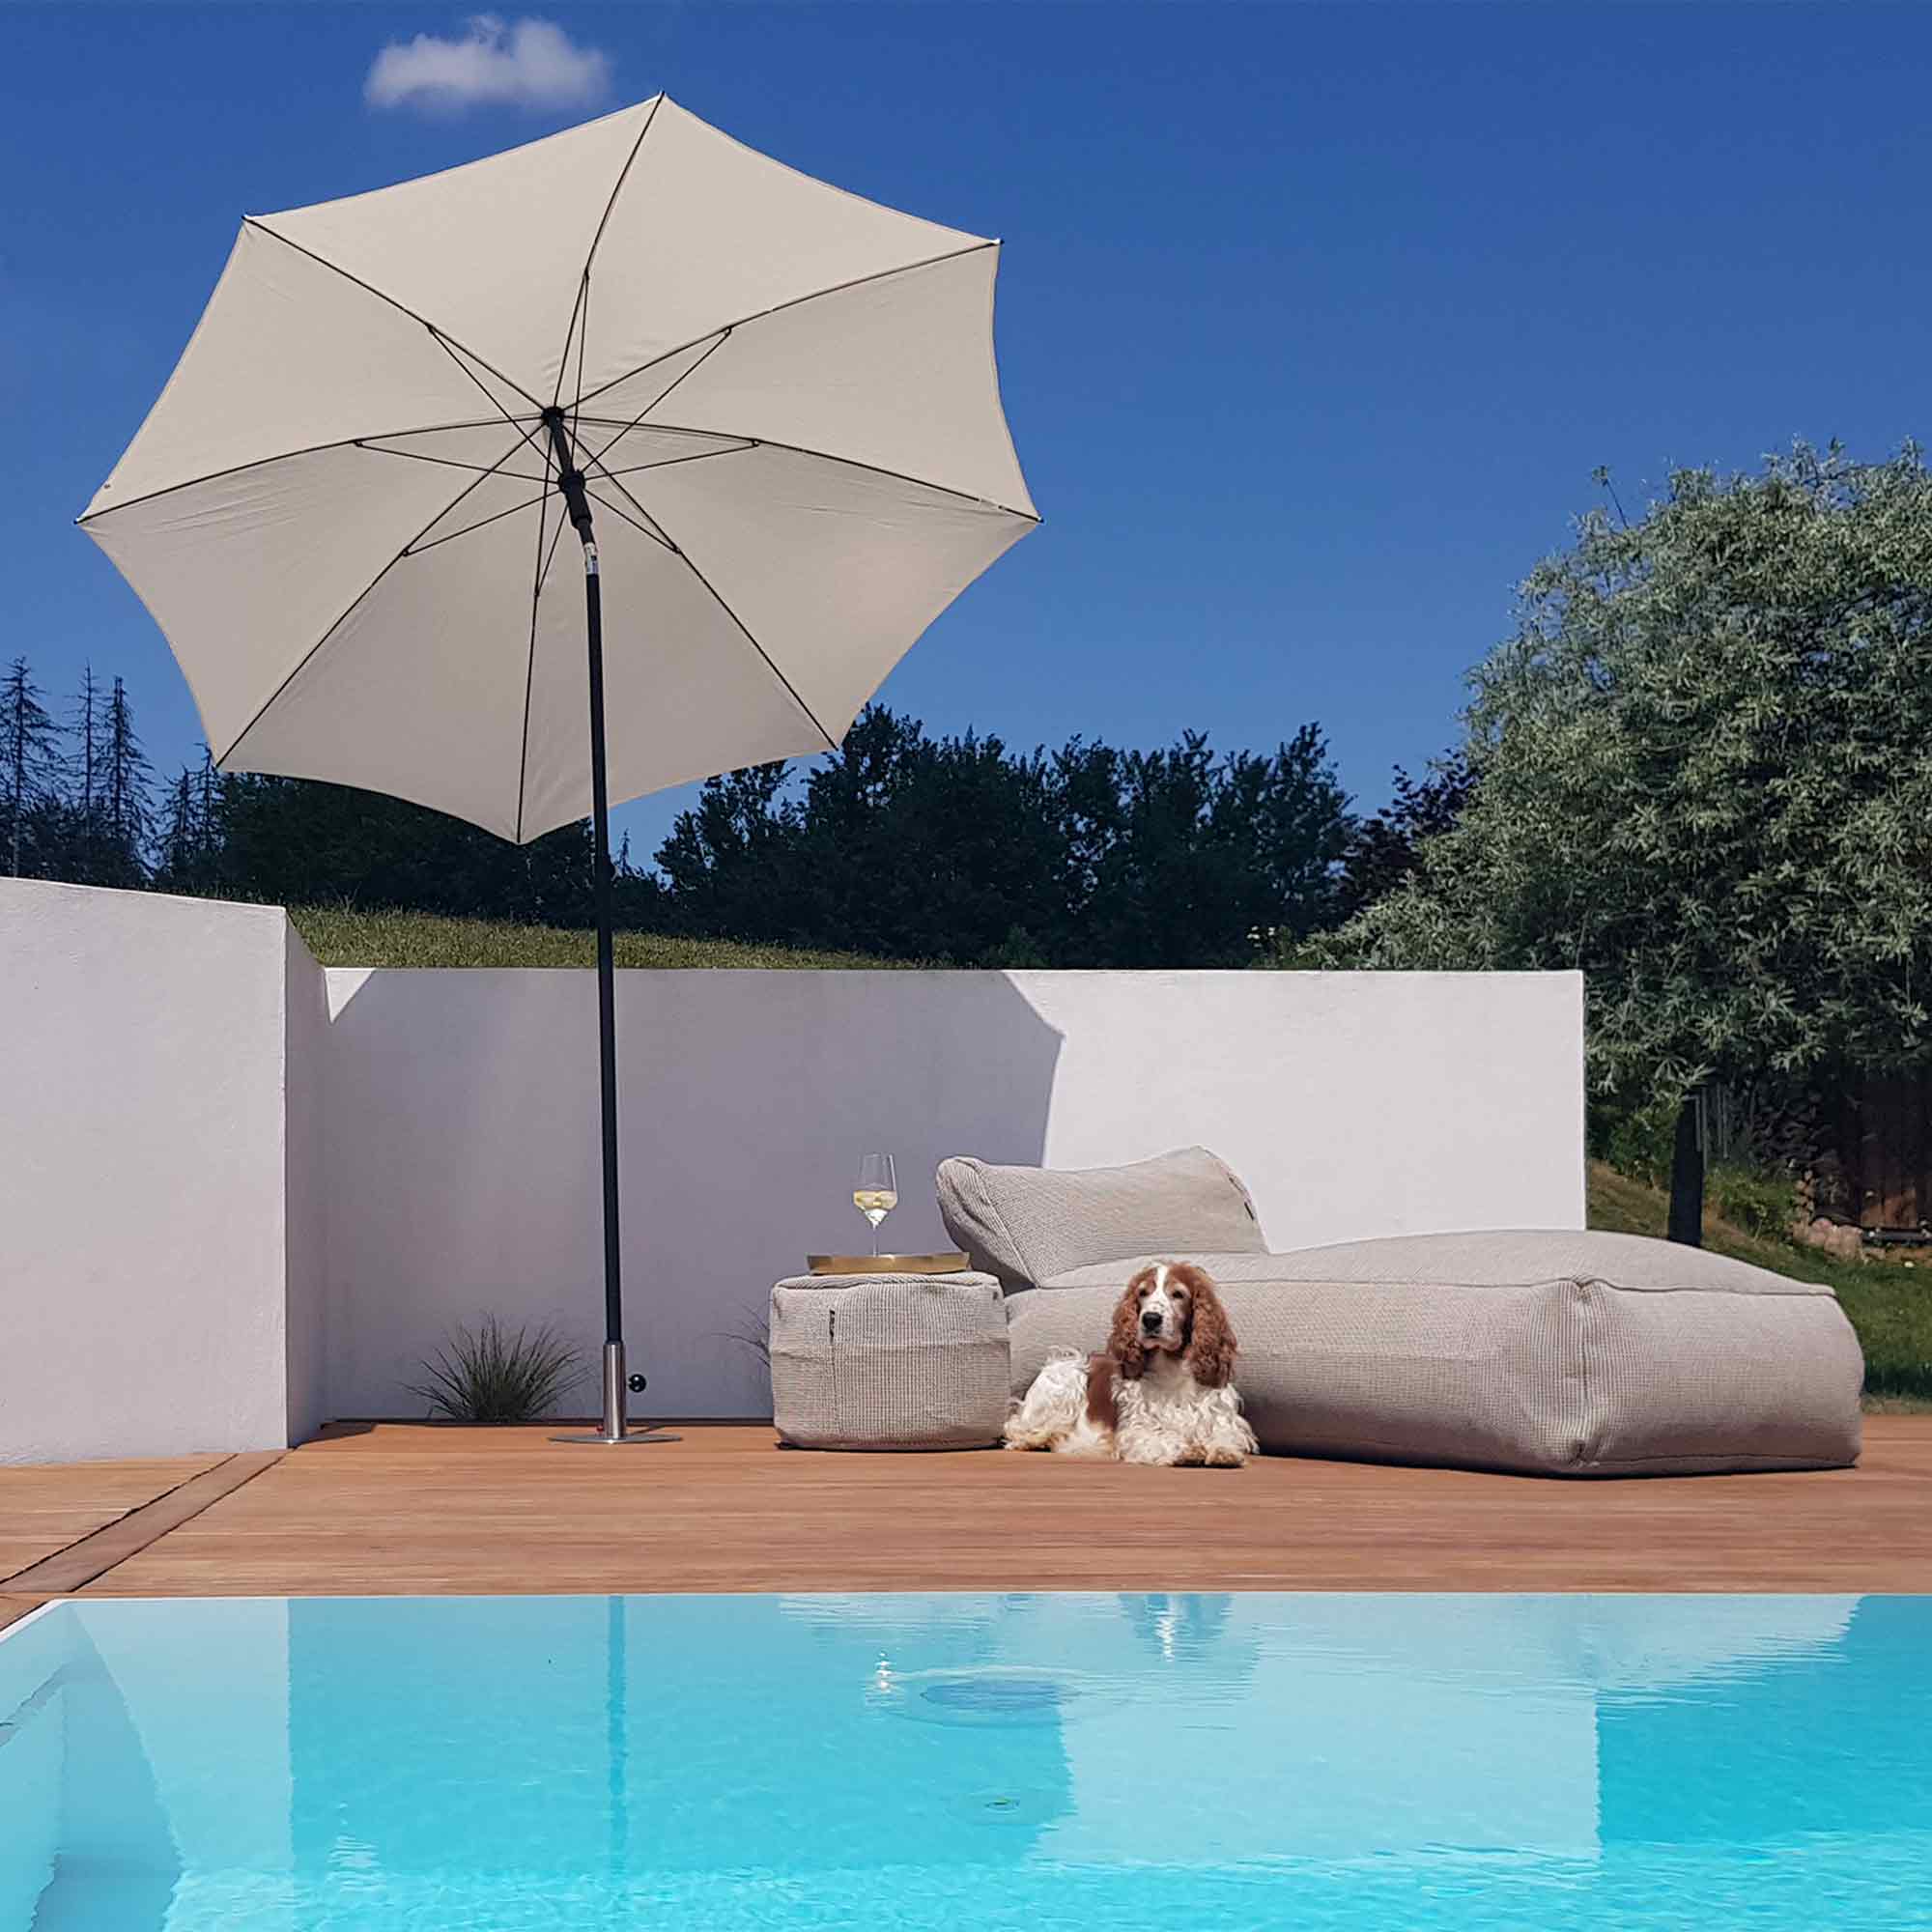 sonnenanker-anchor-base-sun-umbrella-parasol-stand-stainless-steel-disc-wooden-deck-board-terrace-pool